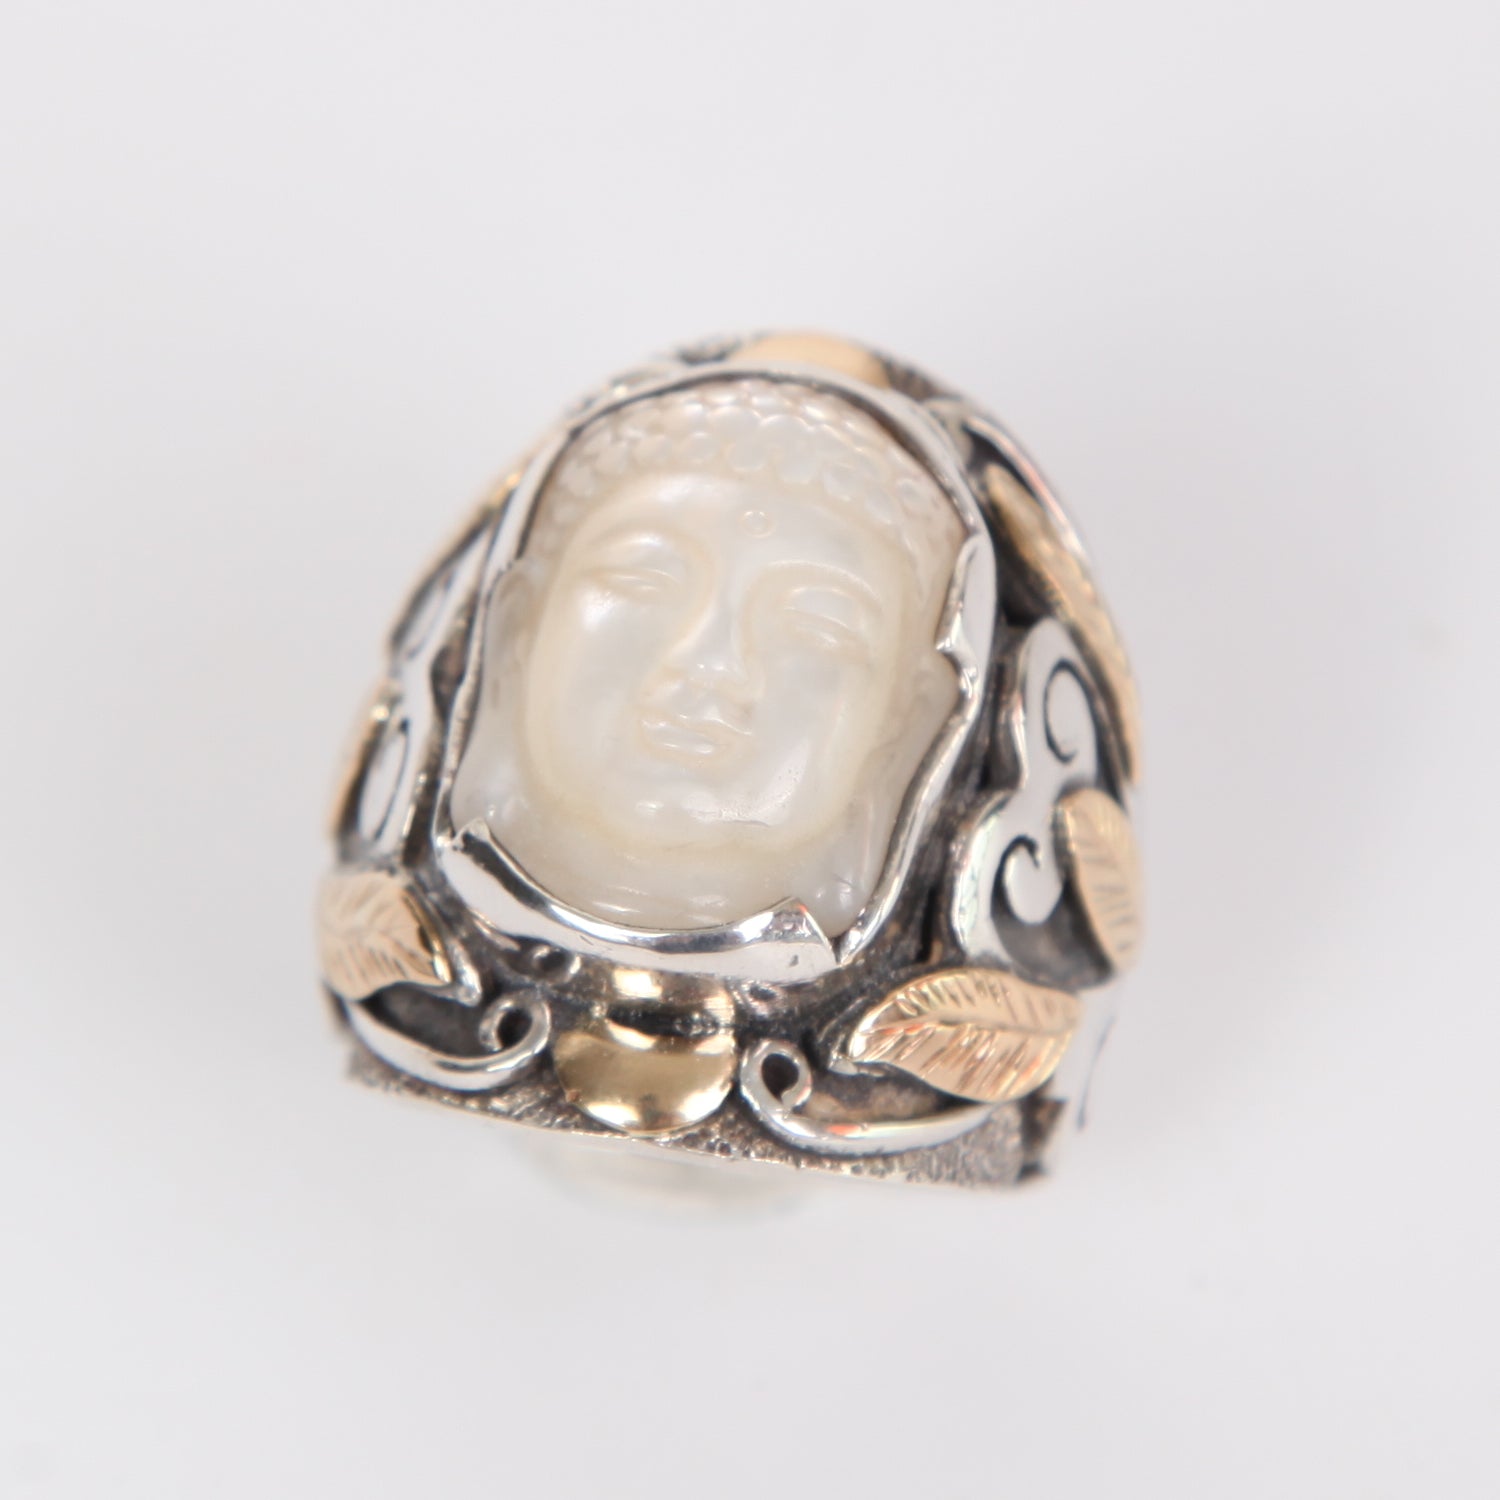 Mother of Pearl Buddha Head Ring with Sterling Silver and 18k Gold